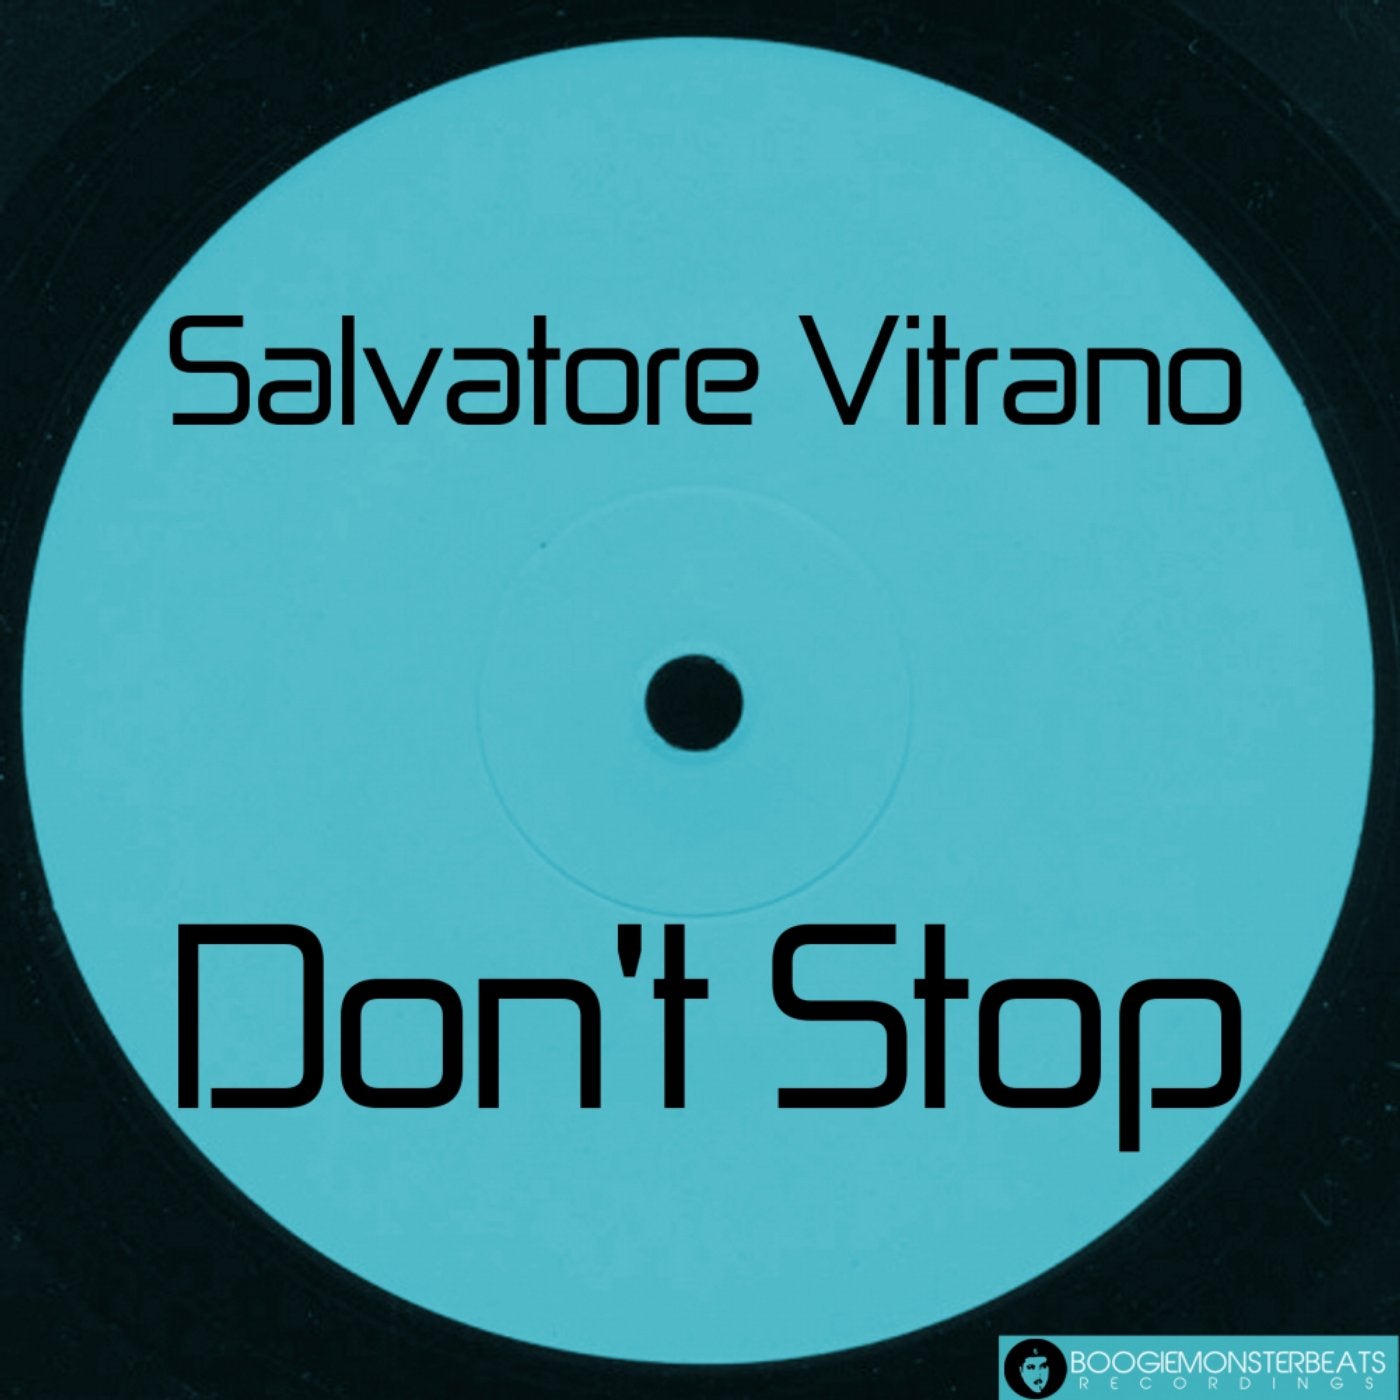 Don't Stop (The Long Journey Of The House Head Mix)